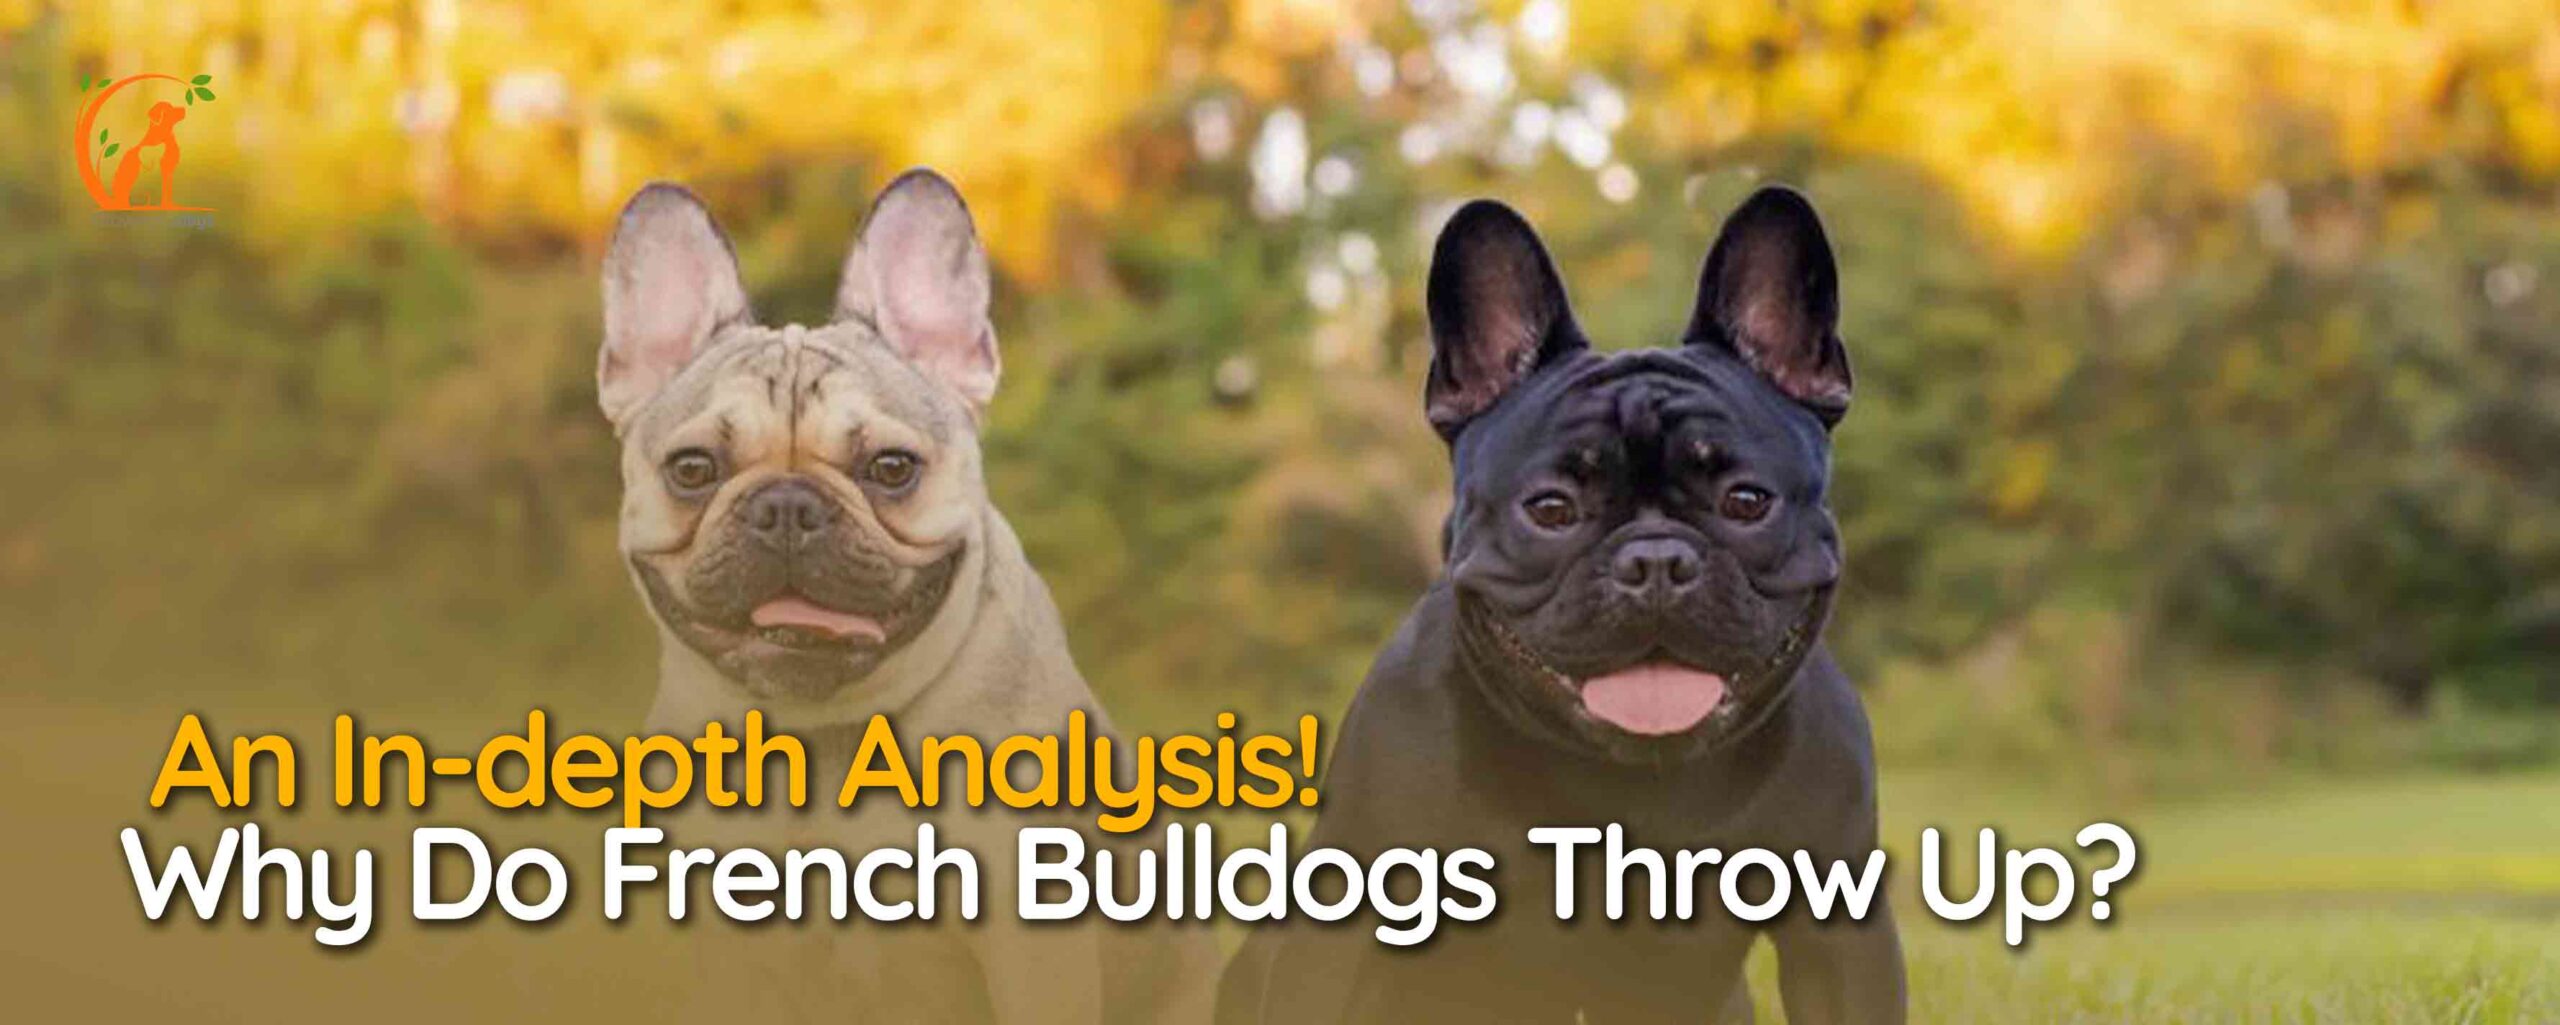 Why Do French Bulldogs Throw Up